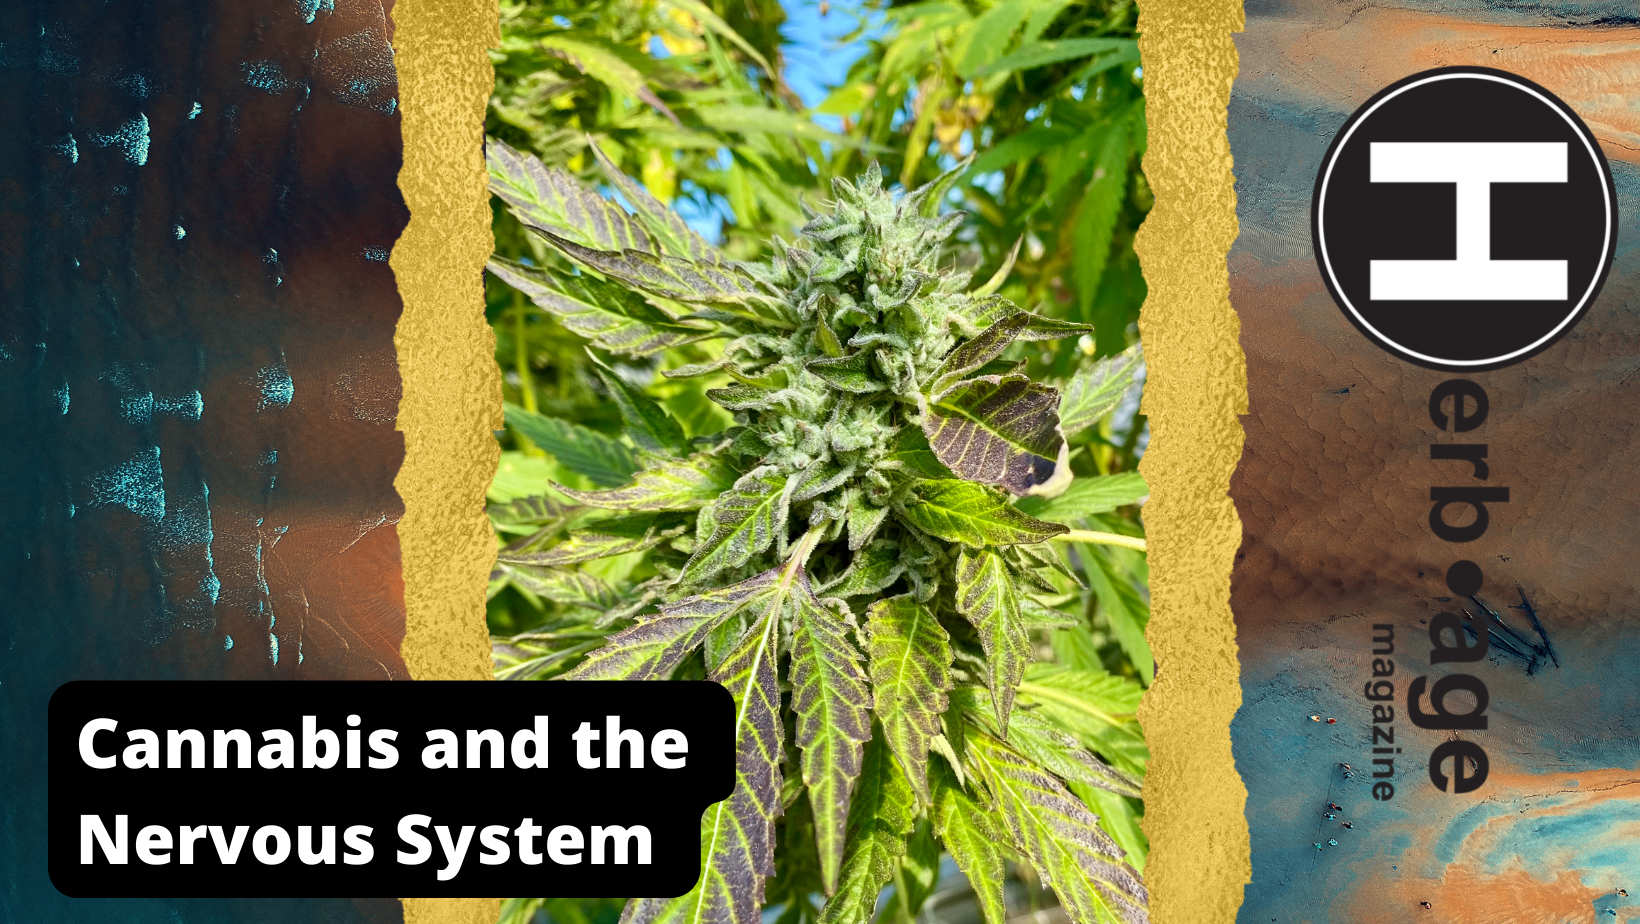 Cannabis and the Nervous System